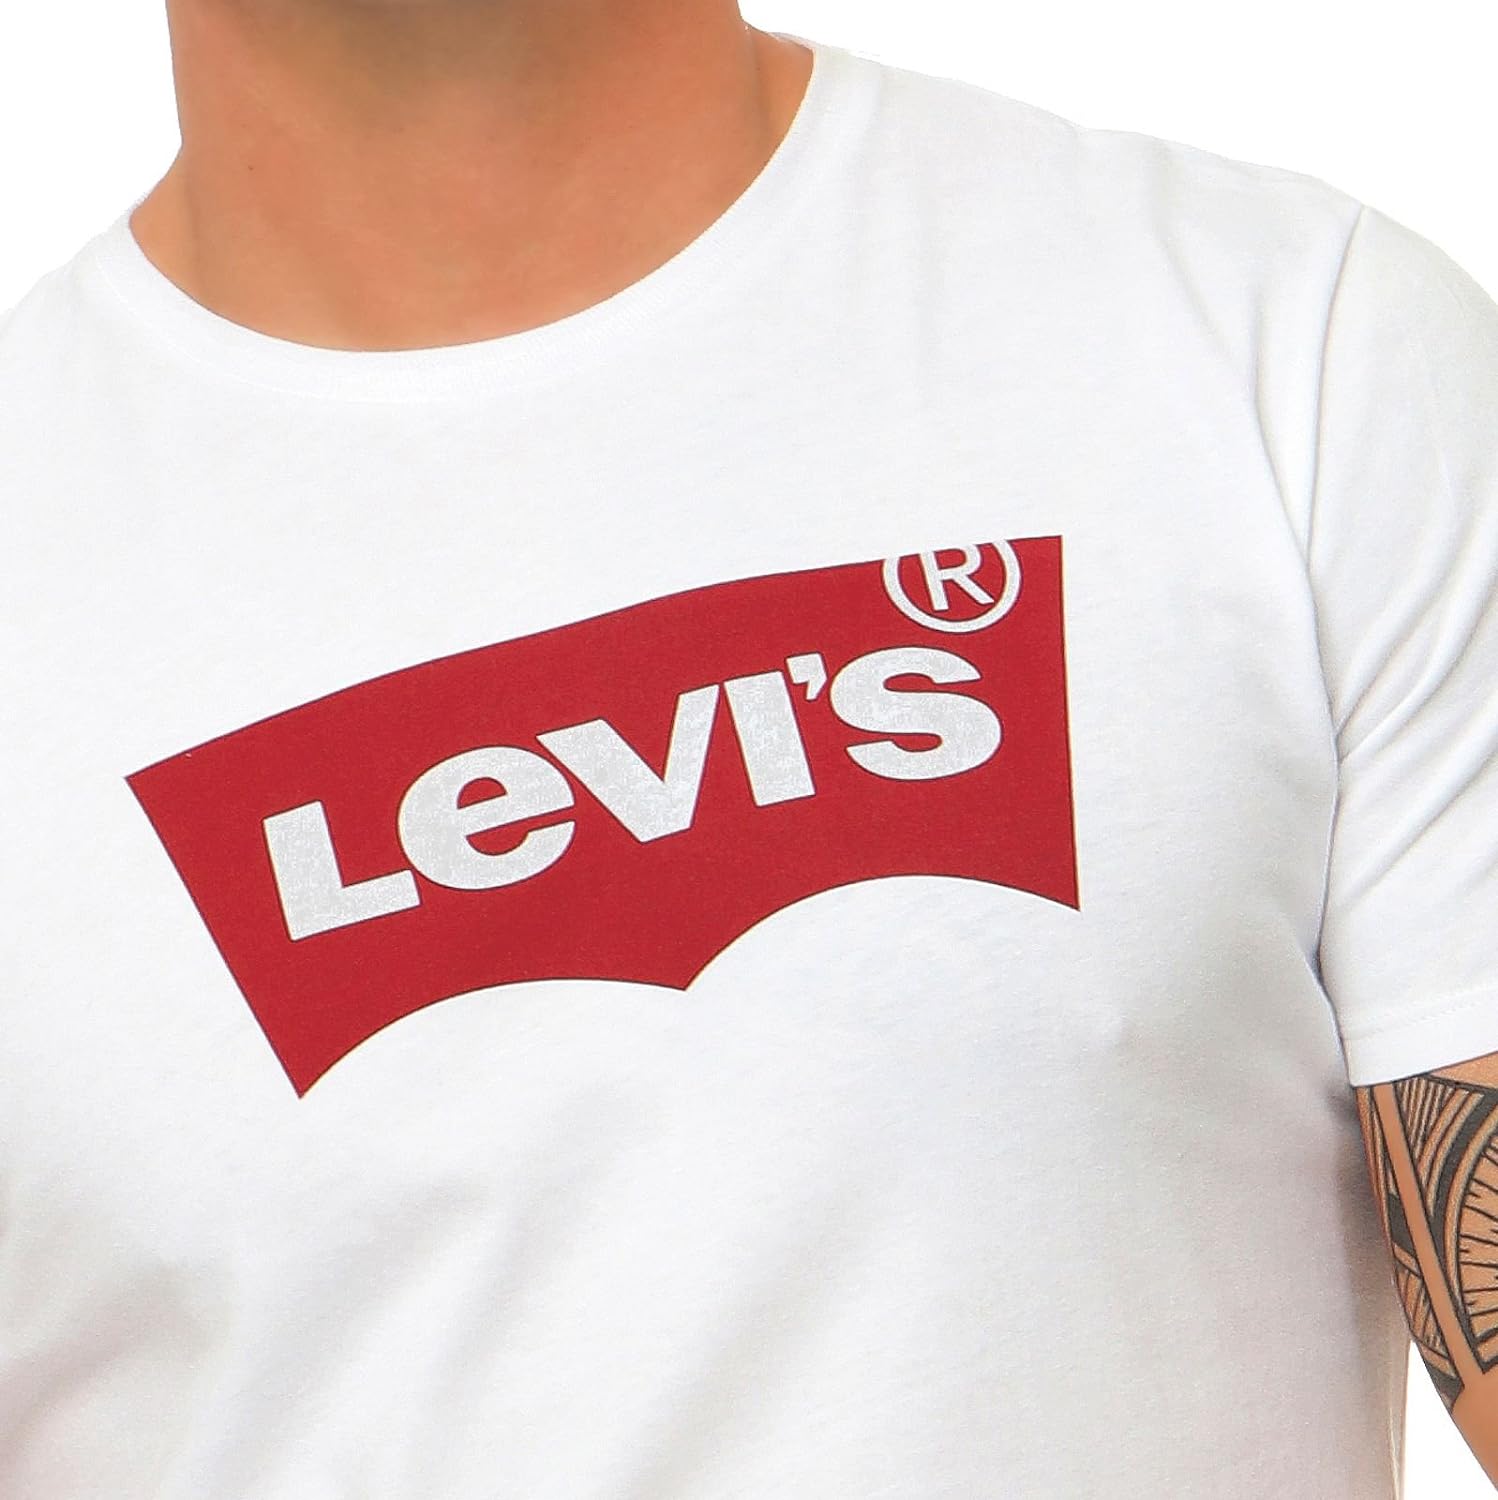 Levi's Mens 17783 Graphic Set-in Neck Short Sleeves T-Shirt